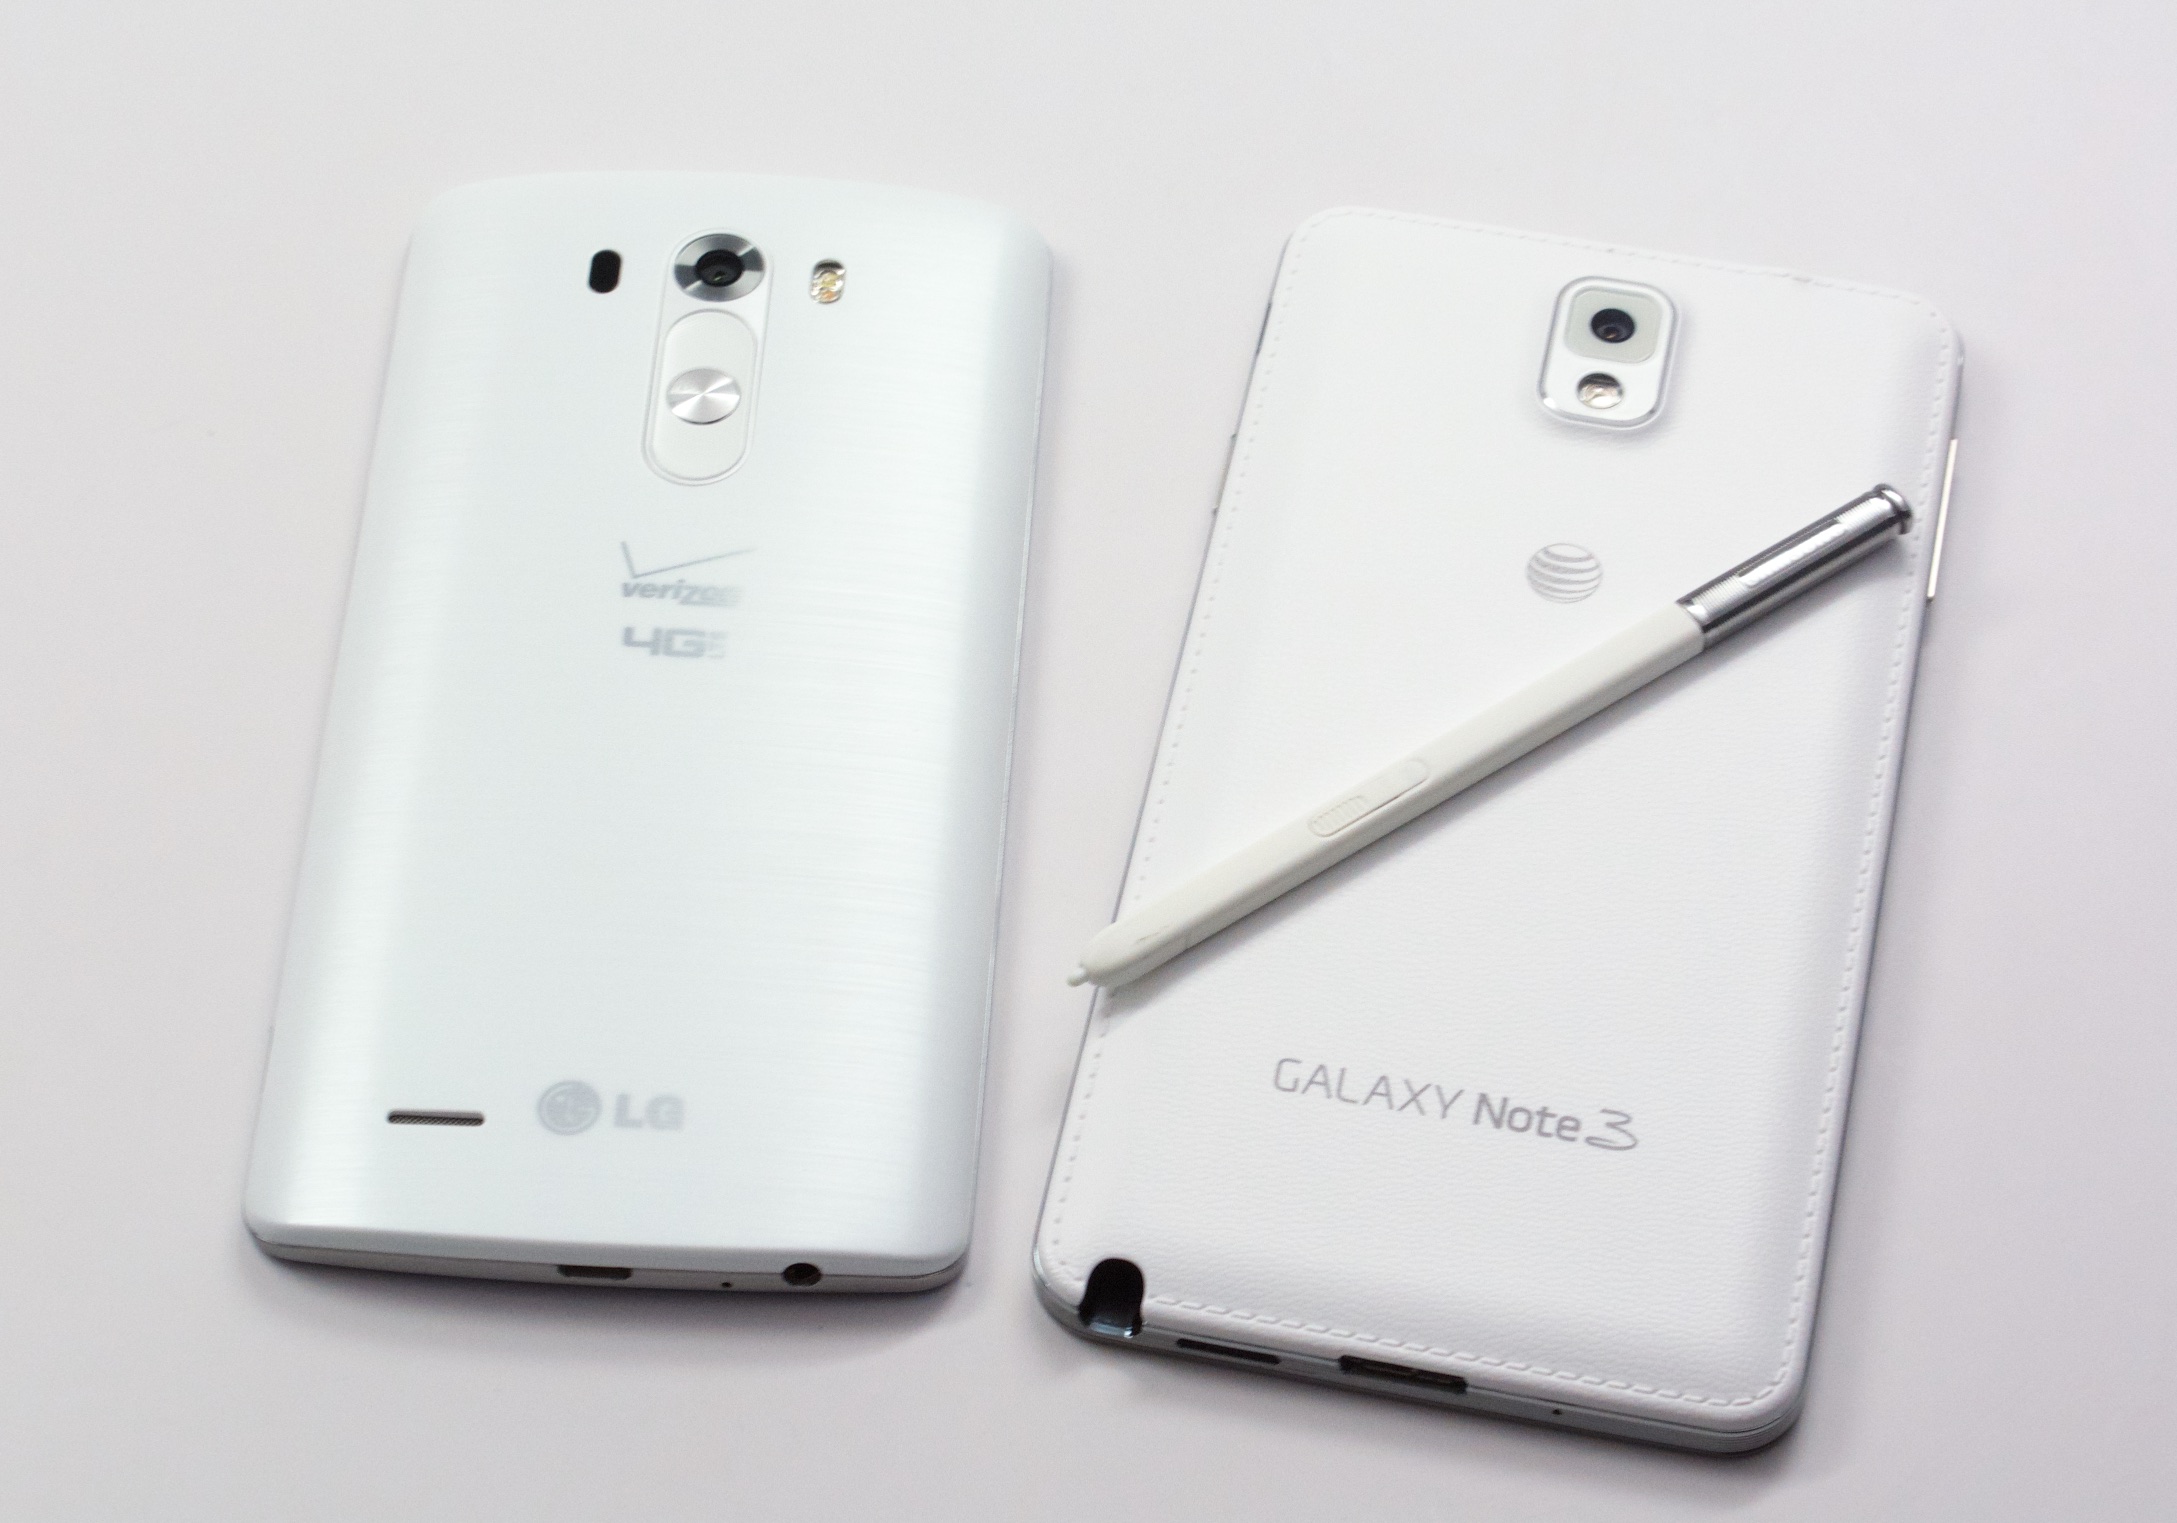 Read our LG G3 vs Galaxy Note 3 buyers guide to know how these two phones compare.